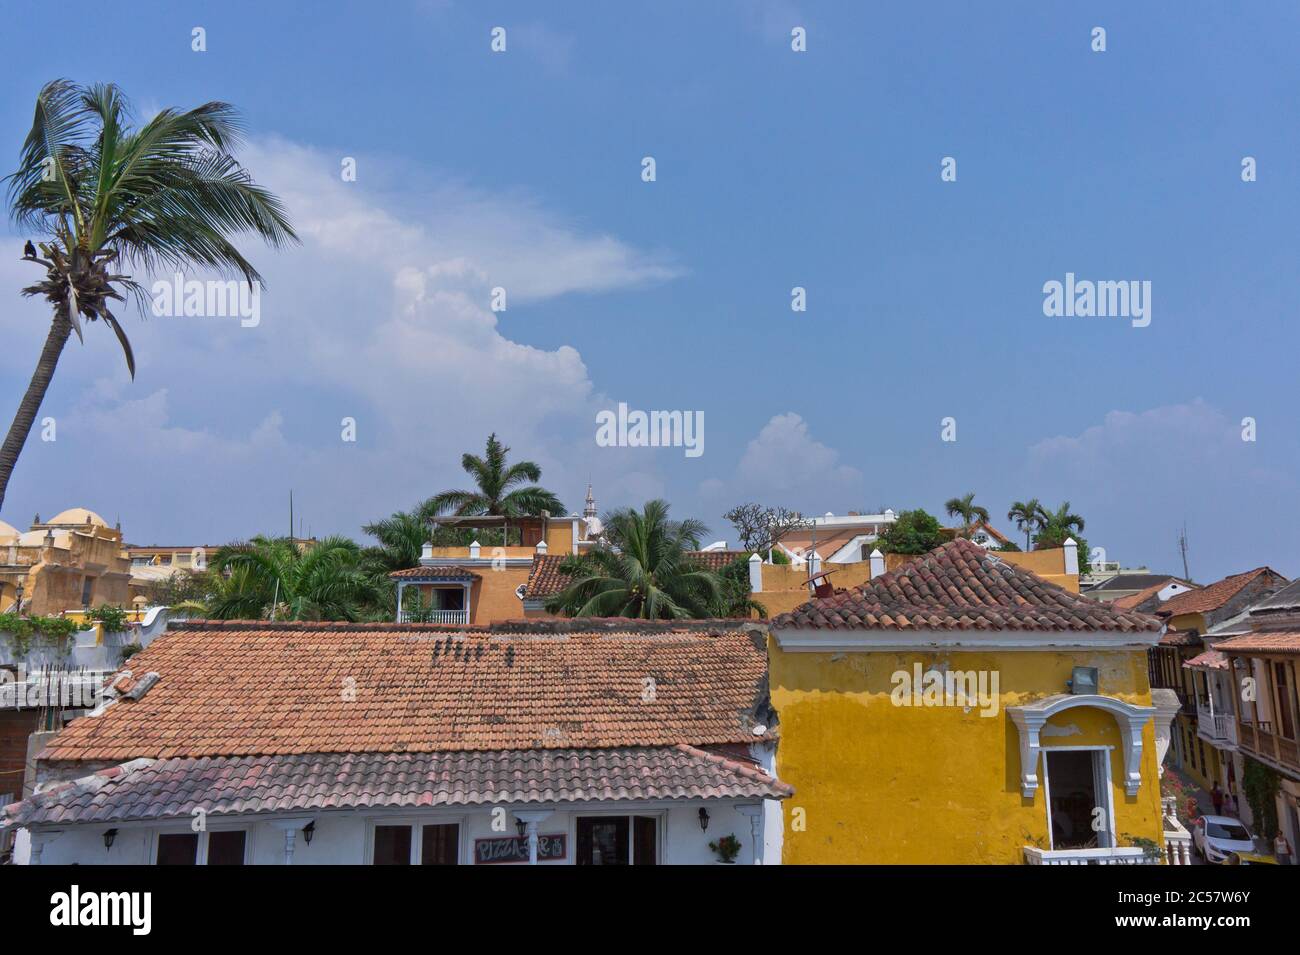 Old city street view, Cartagena, Colombia, South America Stock Photo